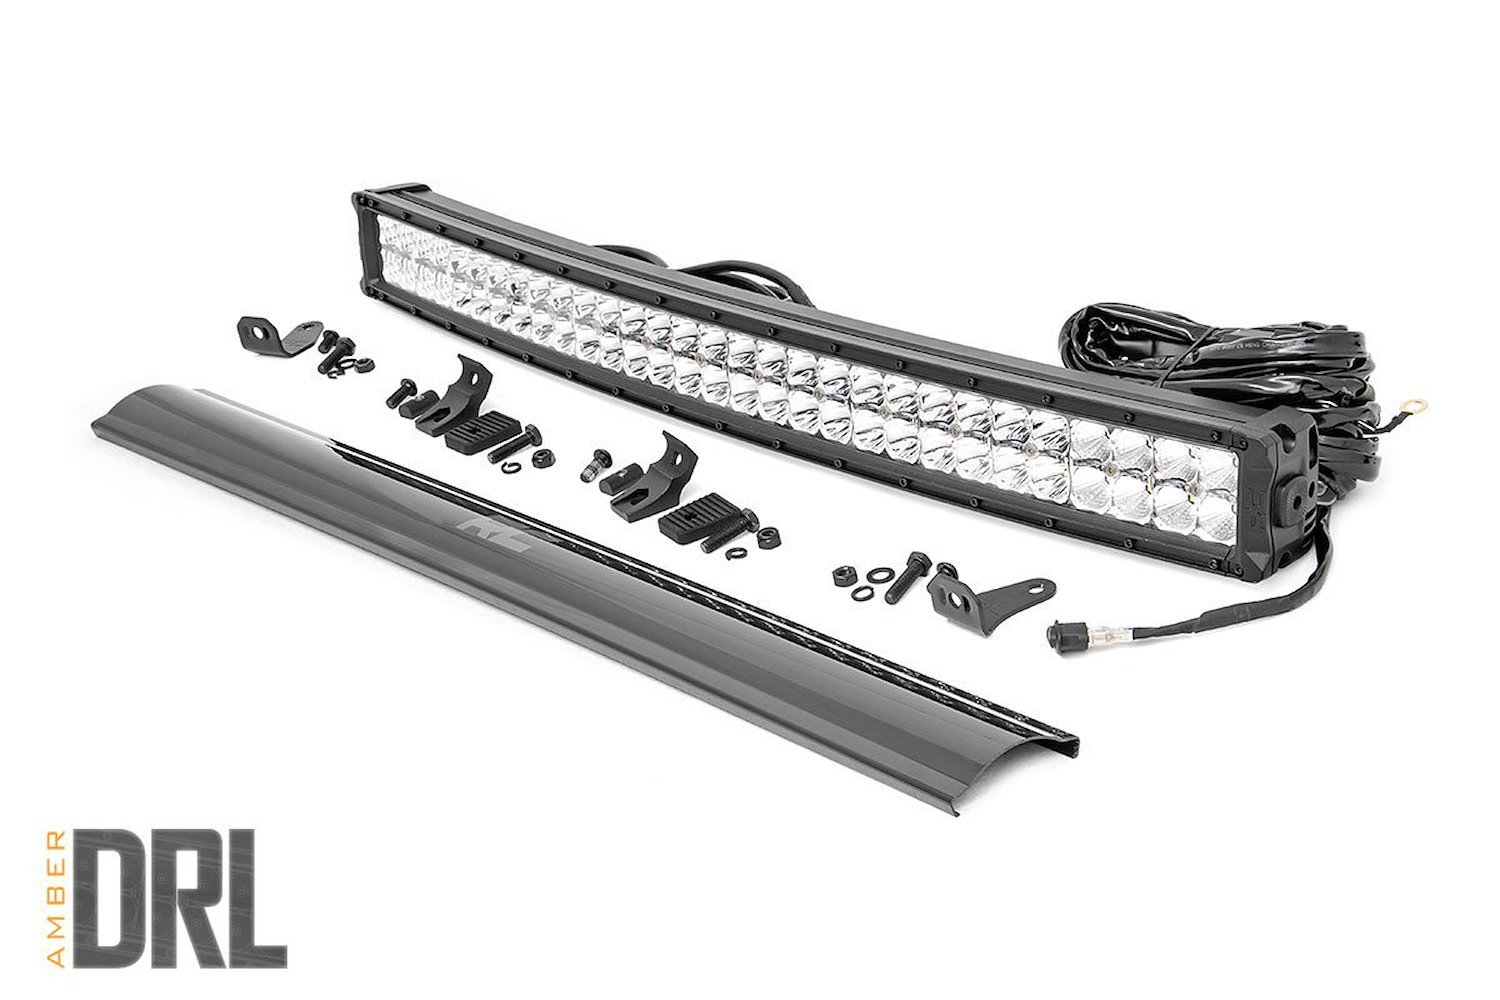 72930D 30-inch Curved Cree LED Light Bar - (Dual Row; Chrome Series w/ Cool White DRL)